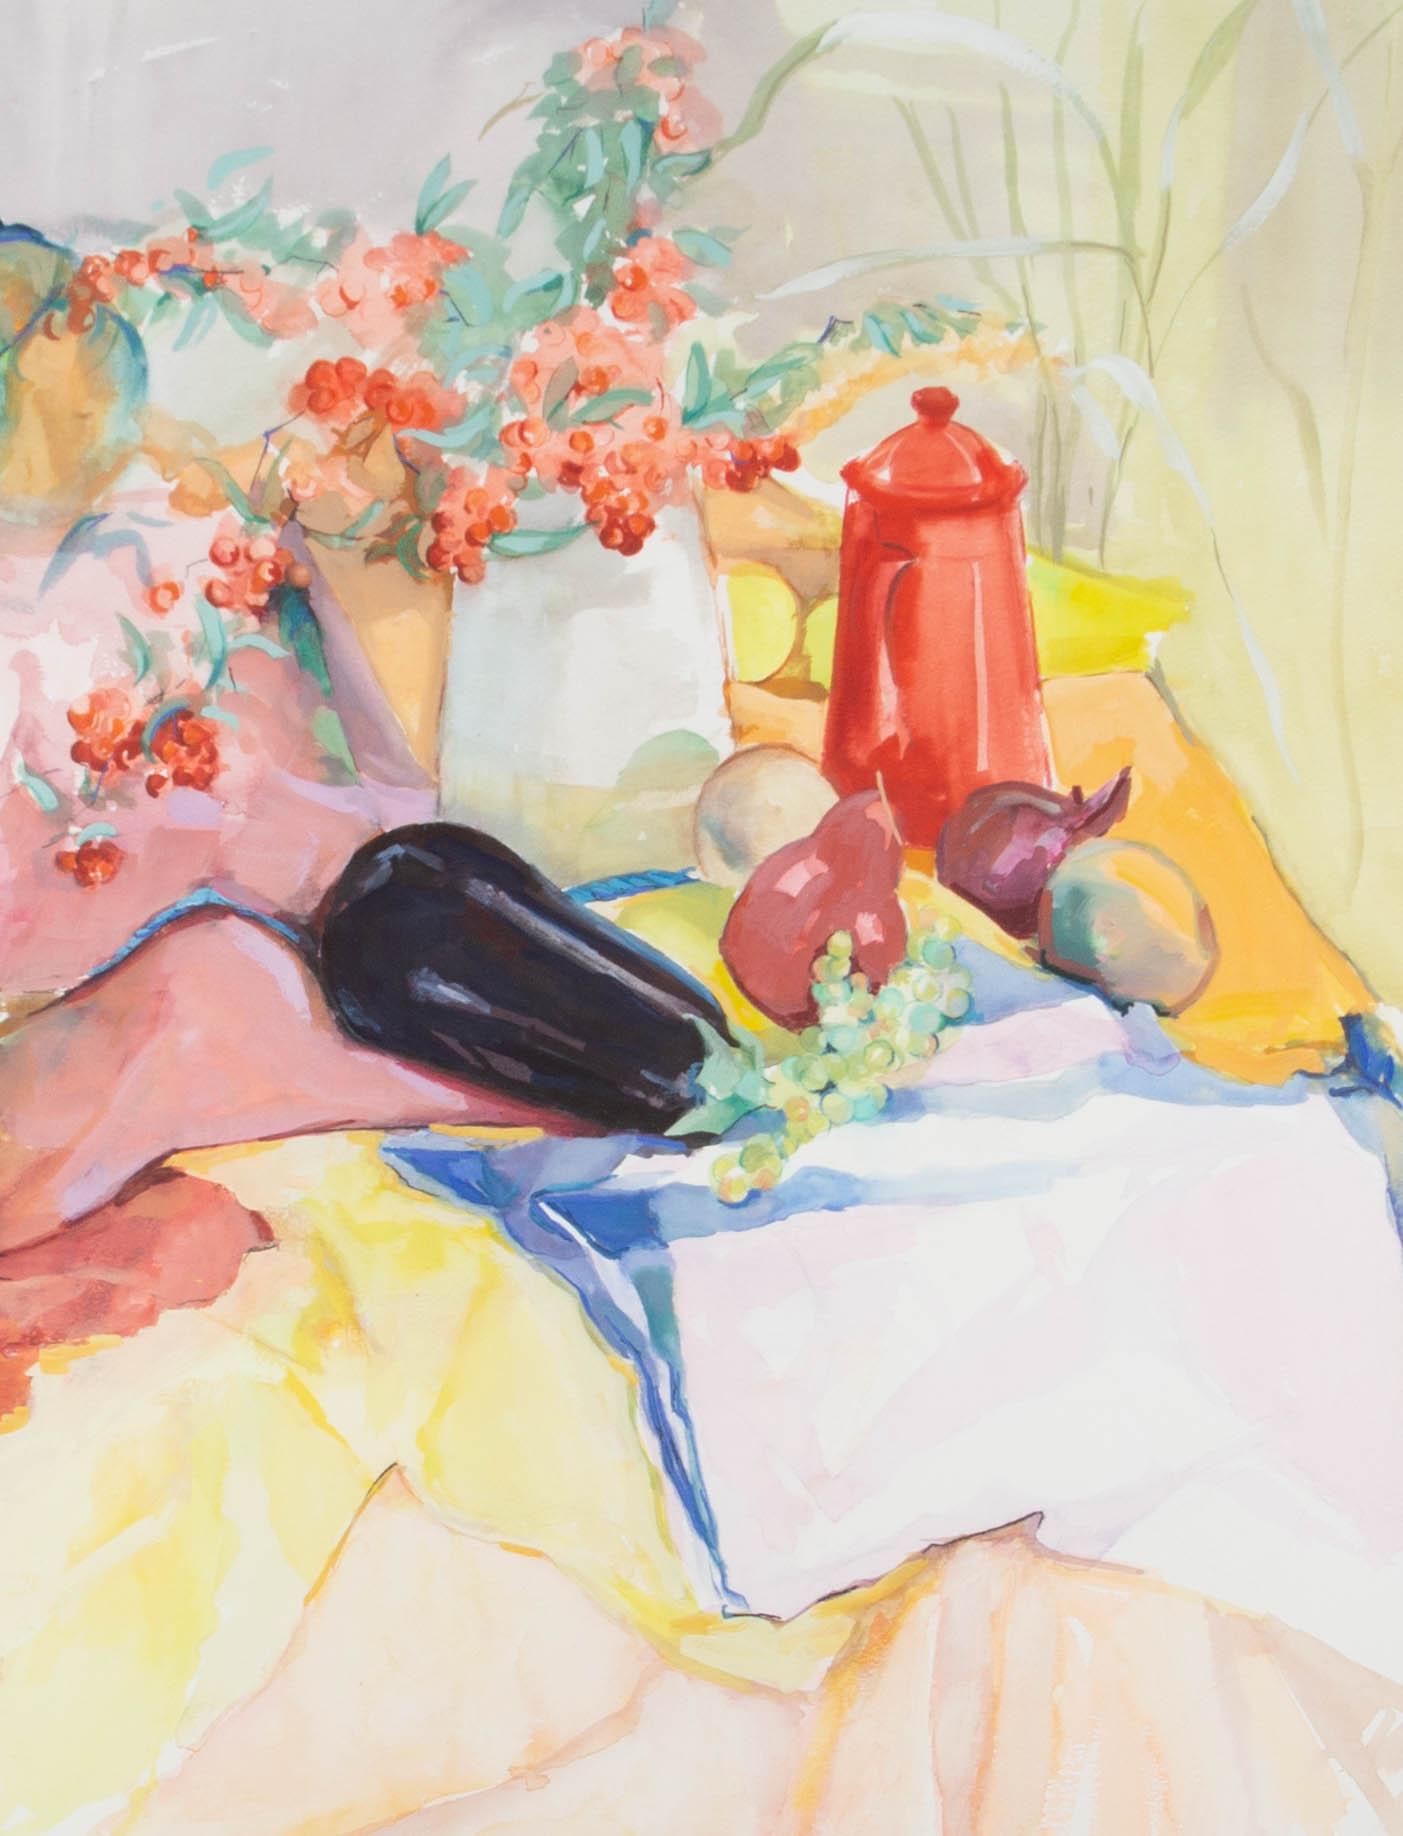 A vibrant and utterly engaging still life in watercolor showing a joyful display of fruit, vegetables and a shiny red coffee pot on an array of colorful drapery. The artist has signed to the lower right and the painting has been attractively